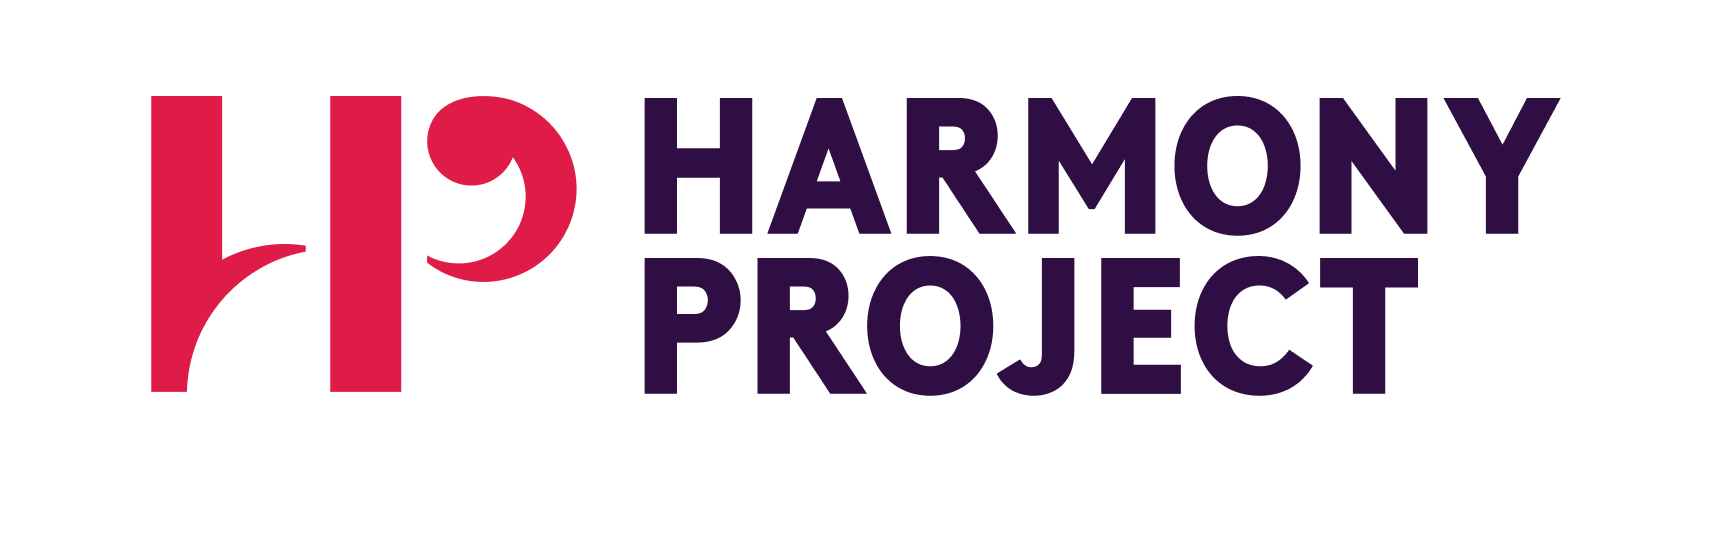 The New Harmony Project